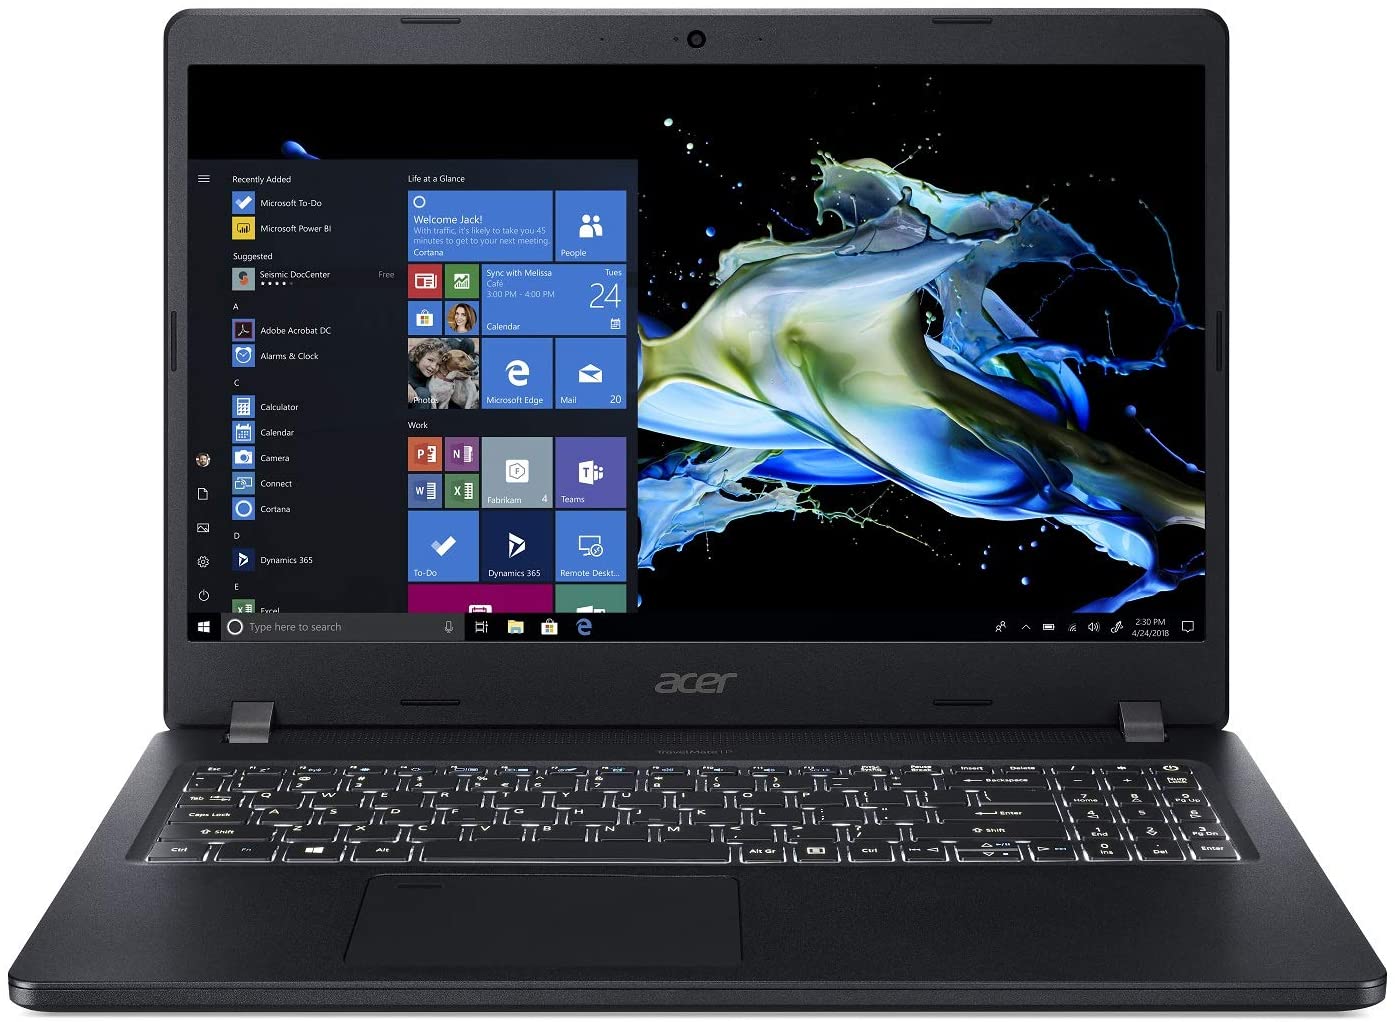 Acer TravelMate P2 15.6-Inch FHD IPS Business & Gaming Laptop